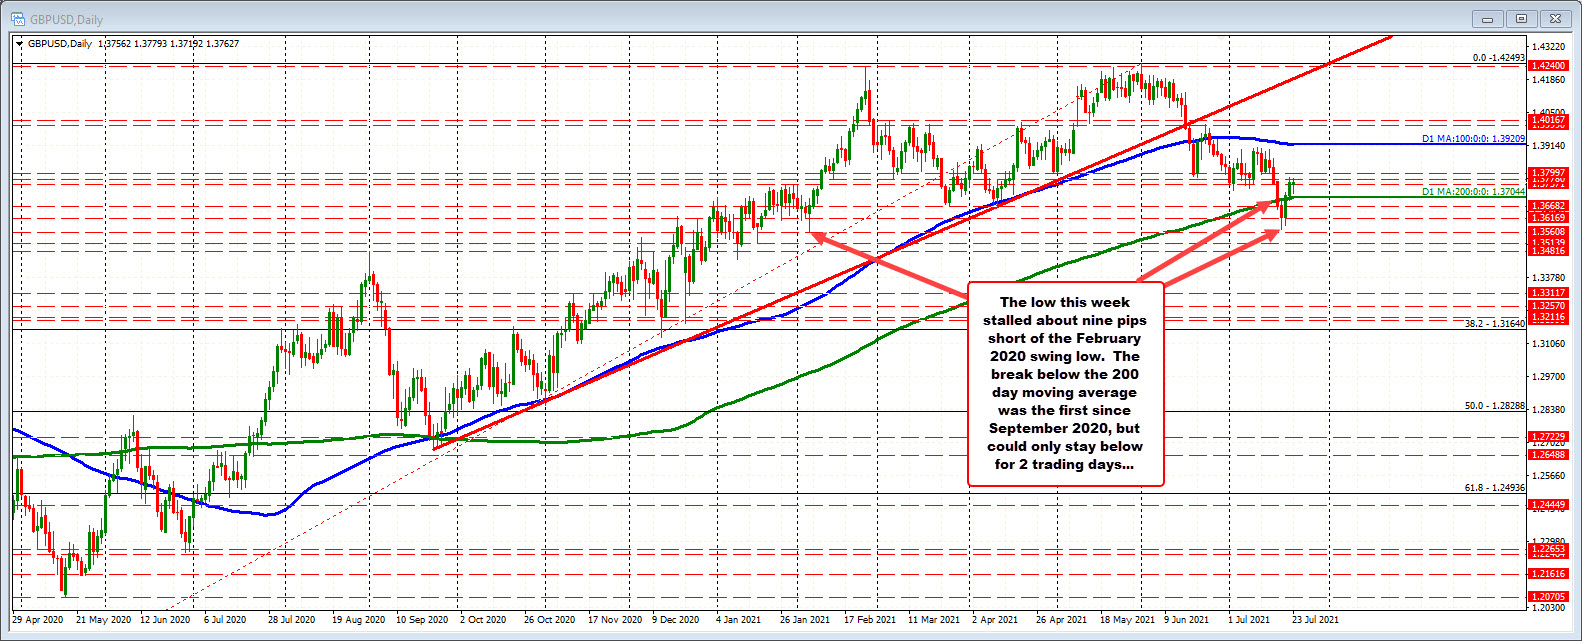 GBPUSD on  the daily chart